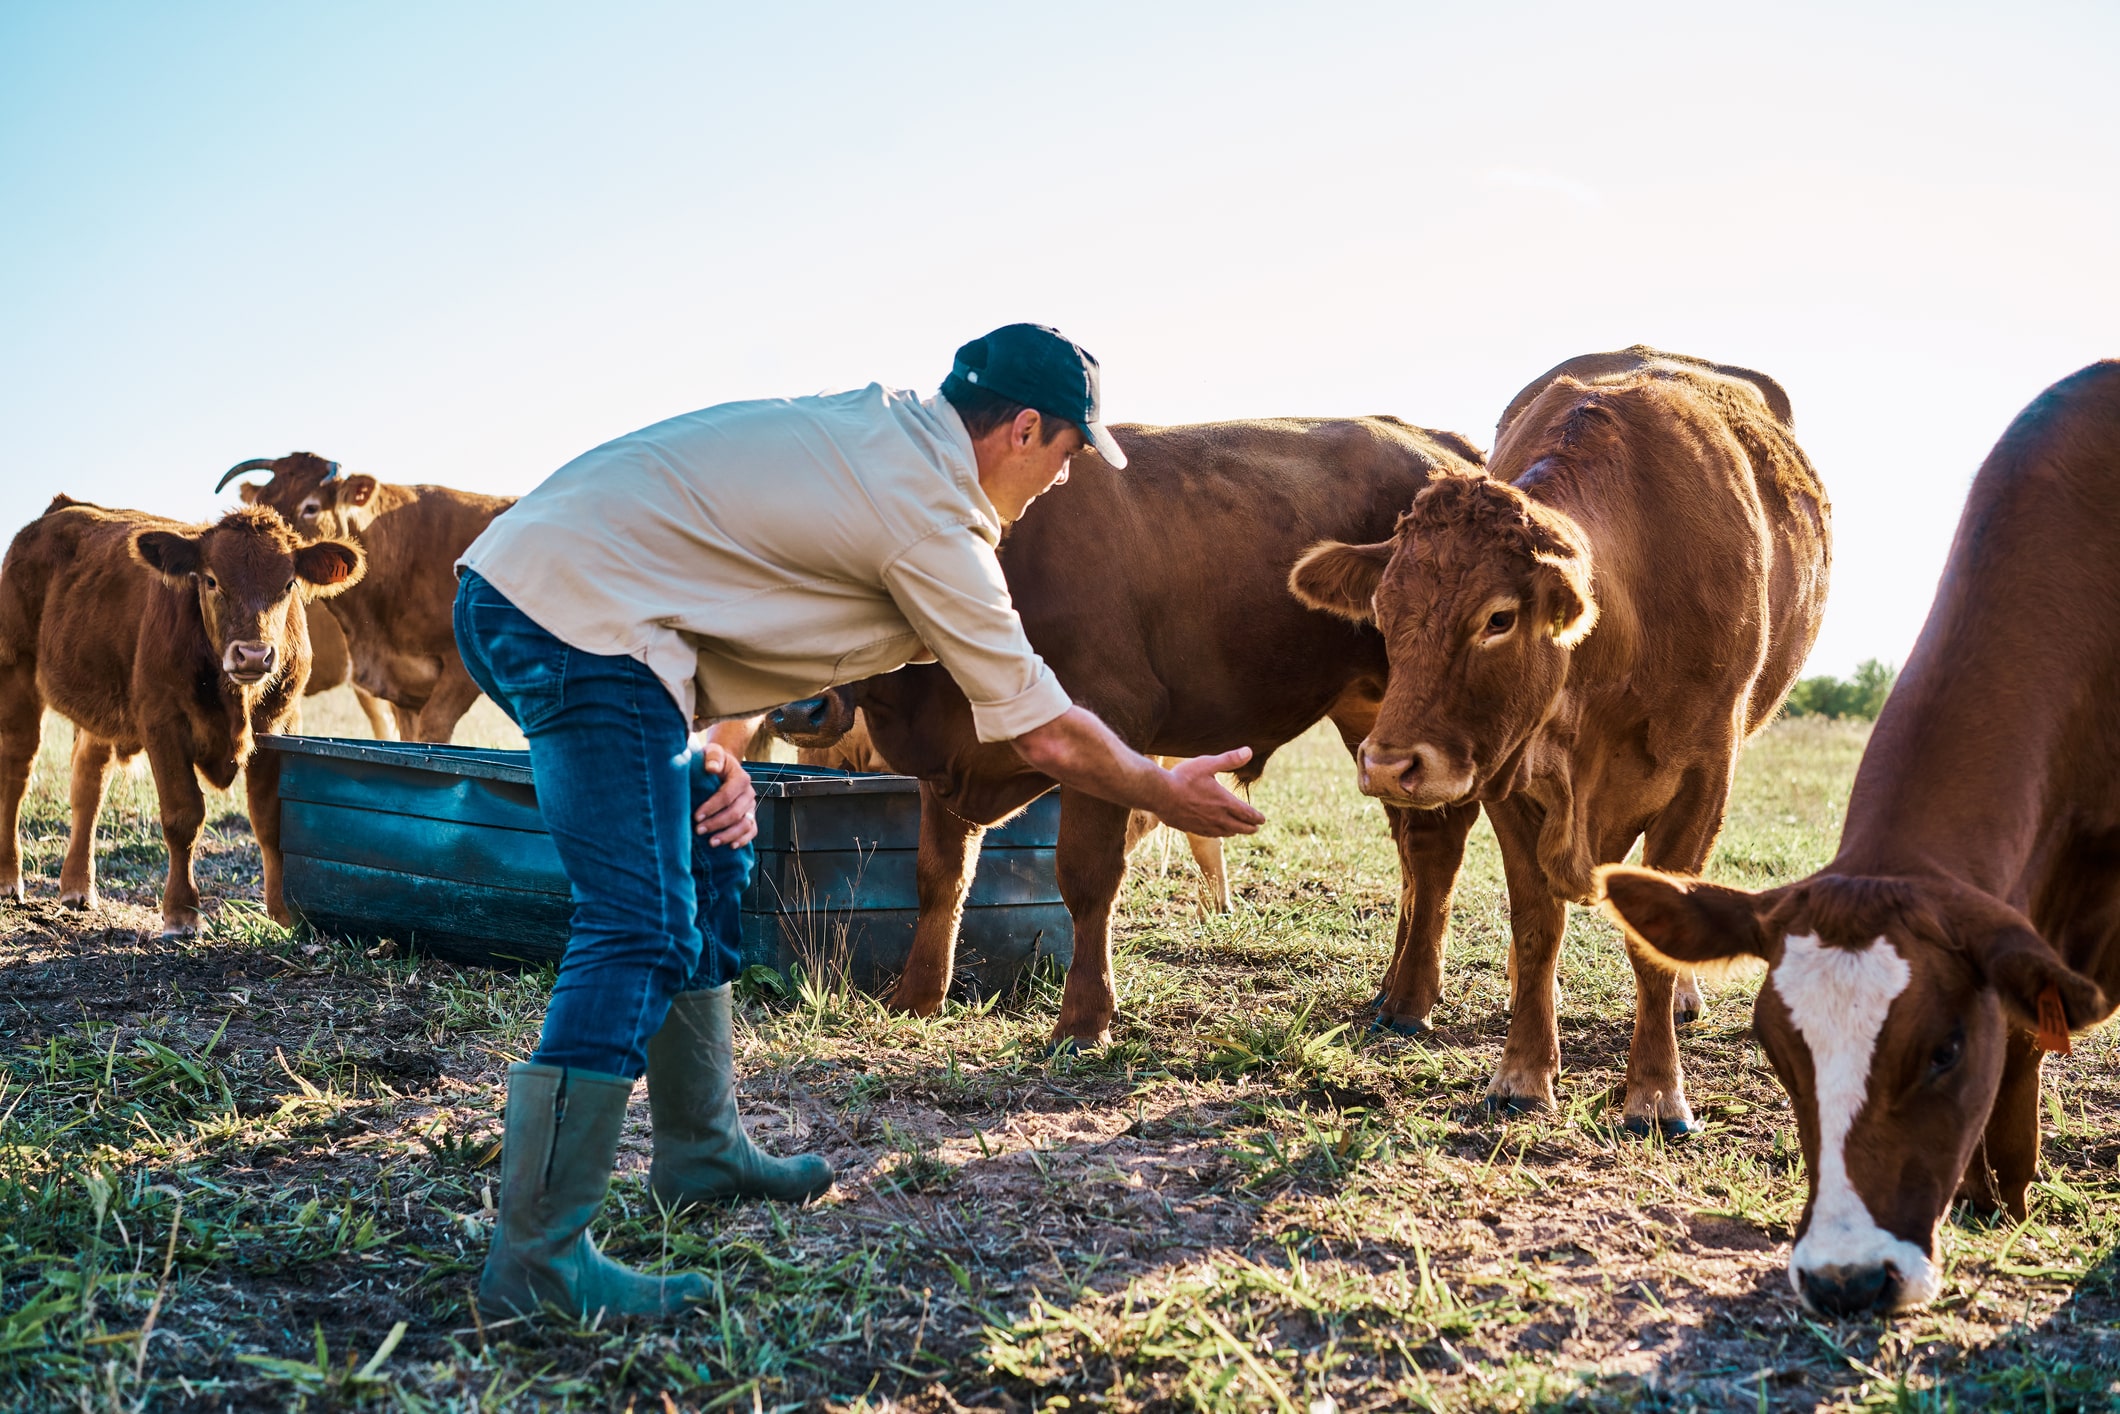 Cattle farmer feeding a herd of cows on an organic and sustainable farm outdoors on a sunny day. A caring agriculture expert or animal lover breeding livestock and taking care of it of farmland